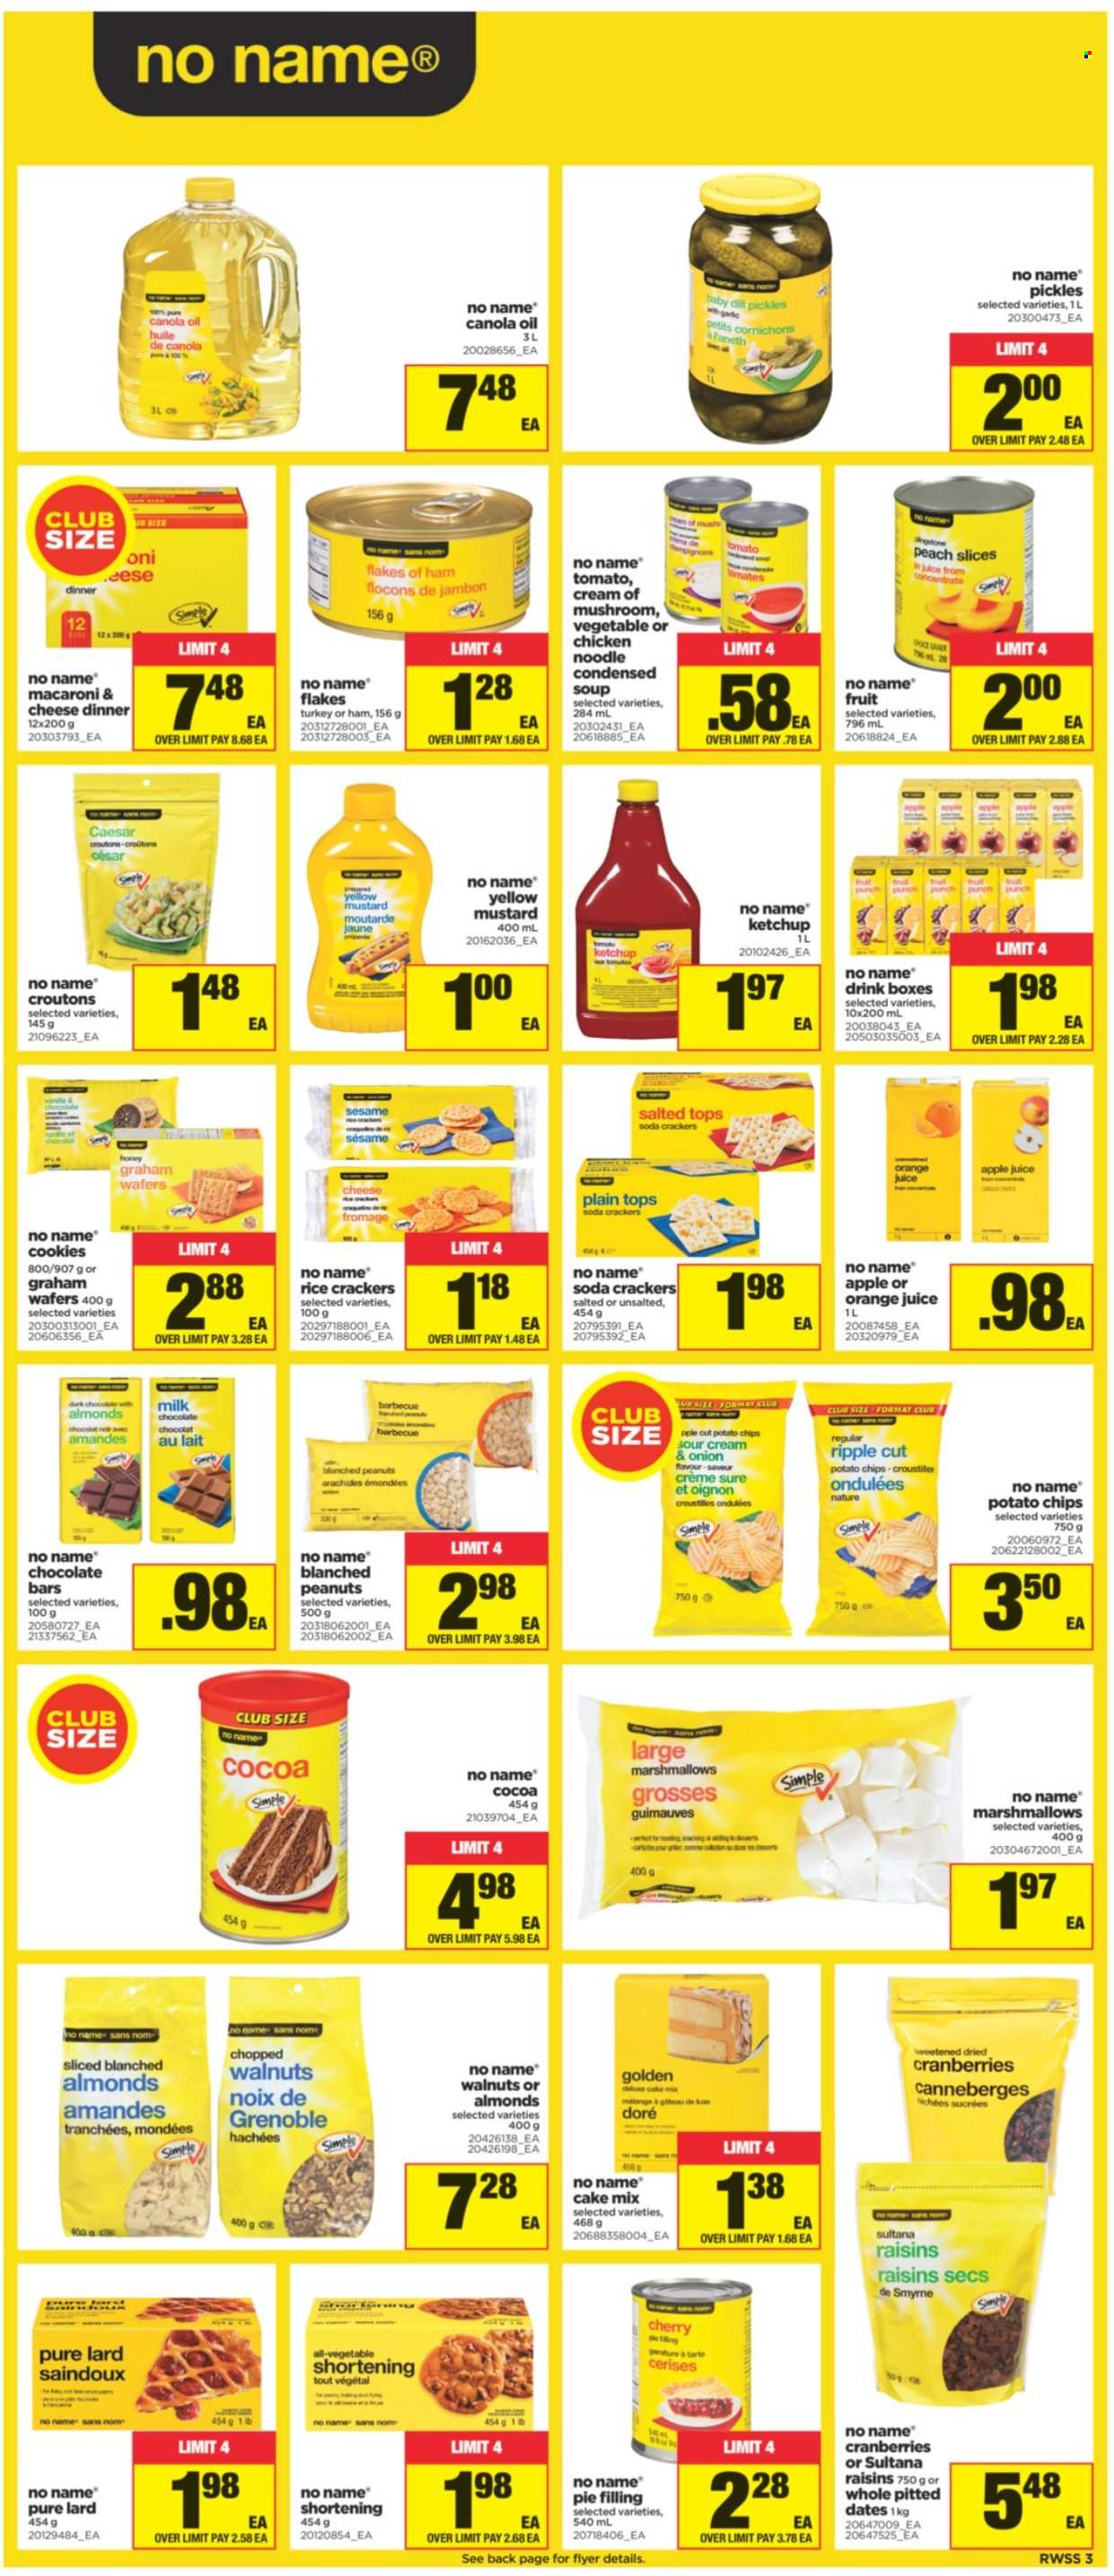 thumbnail - Real Canadian Superstore Flyer - October 15, 2021 - October 21, 2021 - Sales products - cake mix, No Name, macaroni & cheese, soup, noodles, cookies, marshmallows, milk chocolate, wafers, crackers, club milk, chocolate bar, potato chips, rice crackers, croutons, shortening, pie filling, cranberries, pickles, dill, mustard, canola oil, oil, honey, almonds, peanuts, dried fruit, dried dates, apple juice, orange juice, juice, soda, Sure, lard, raisins, ketchup, chips. Page 3.